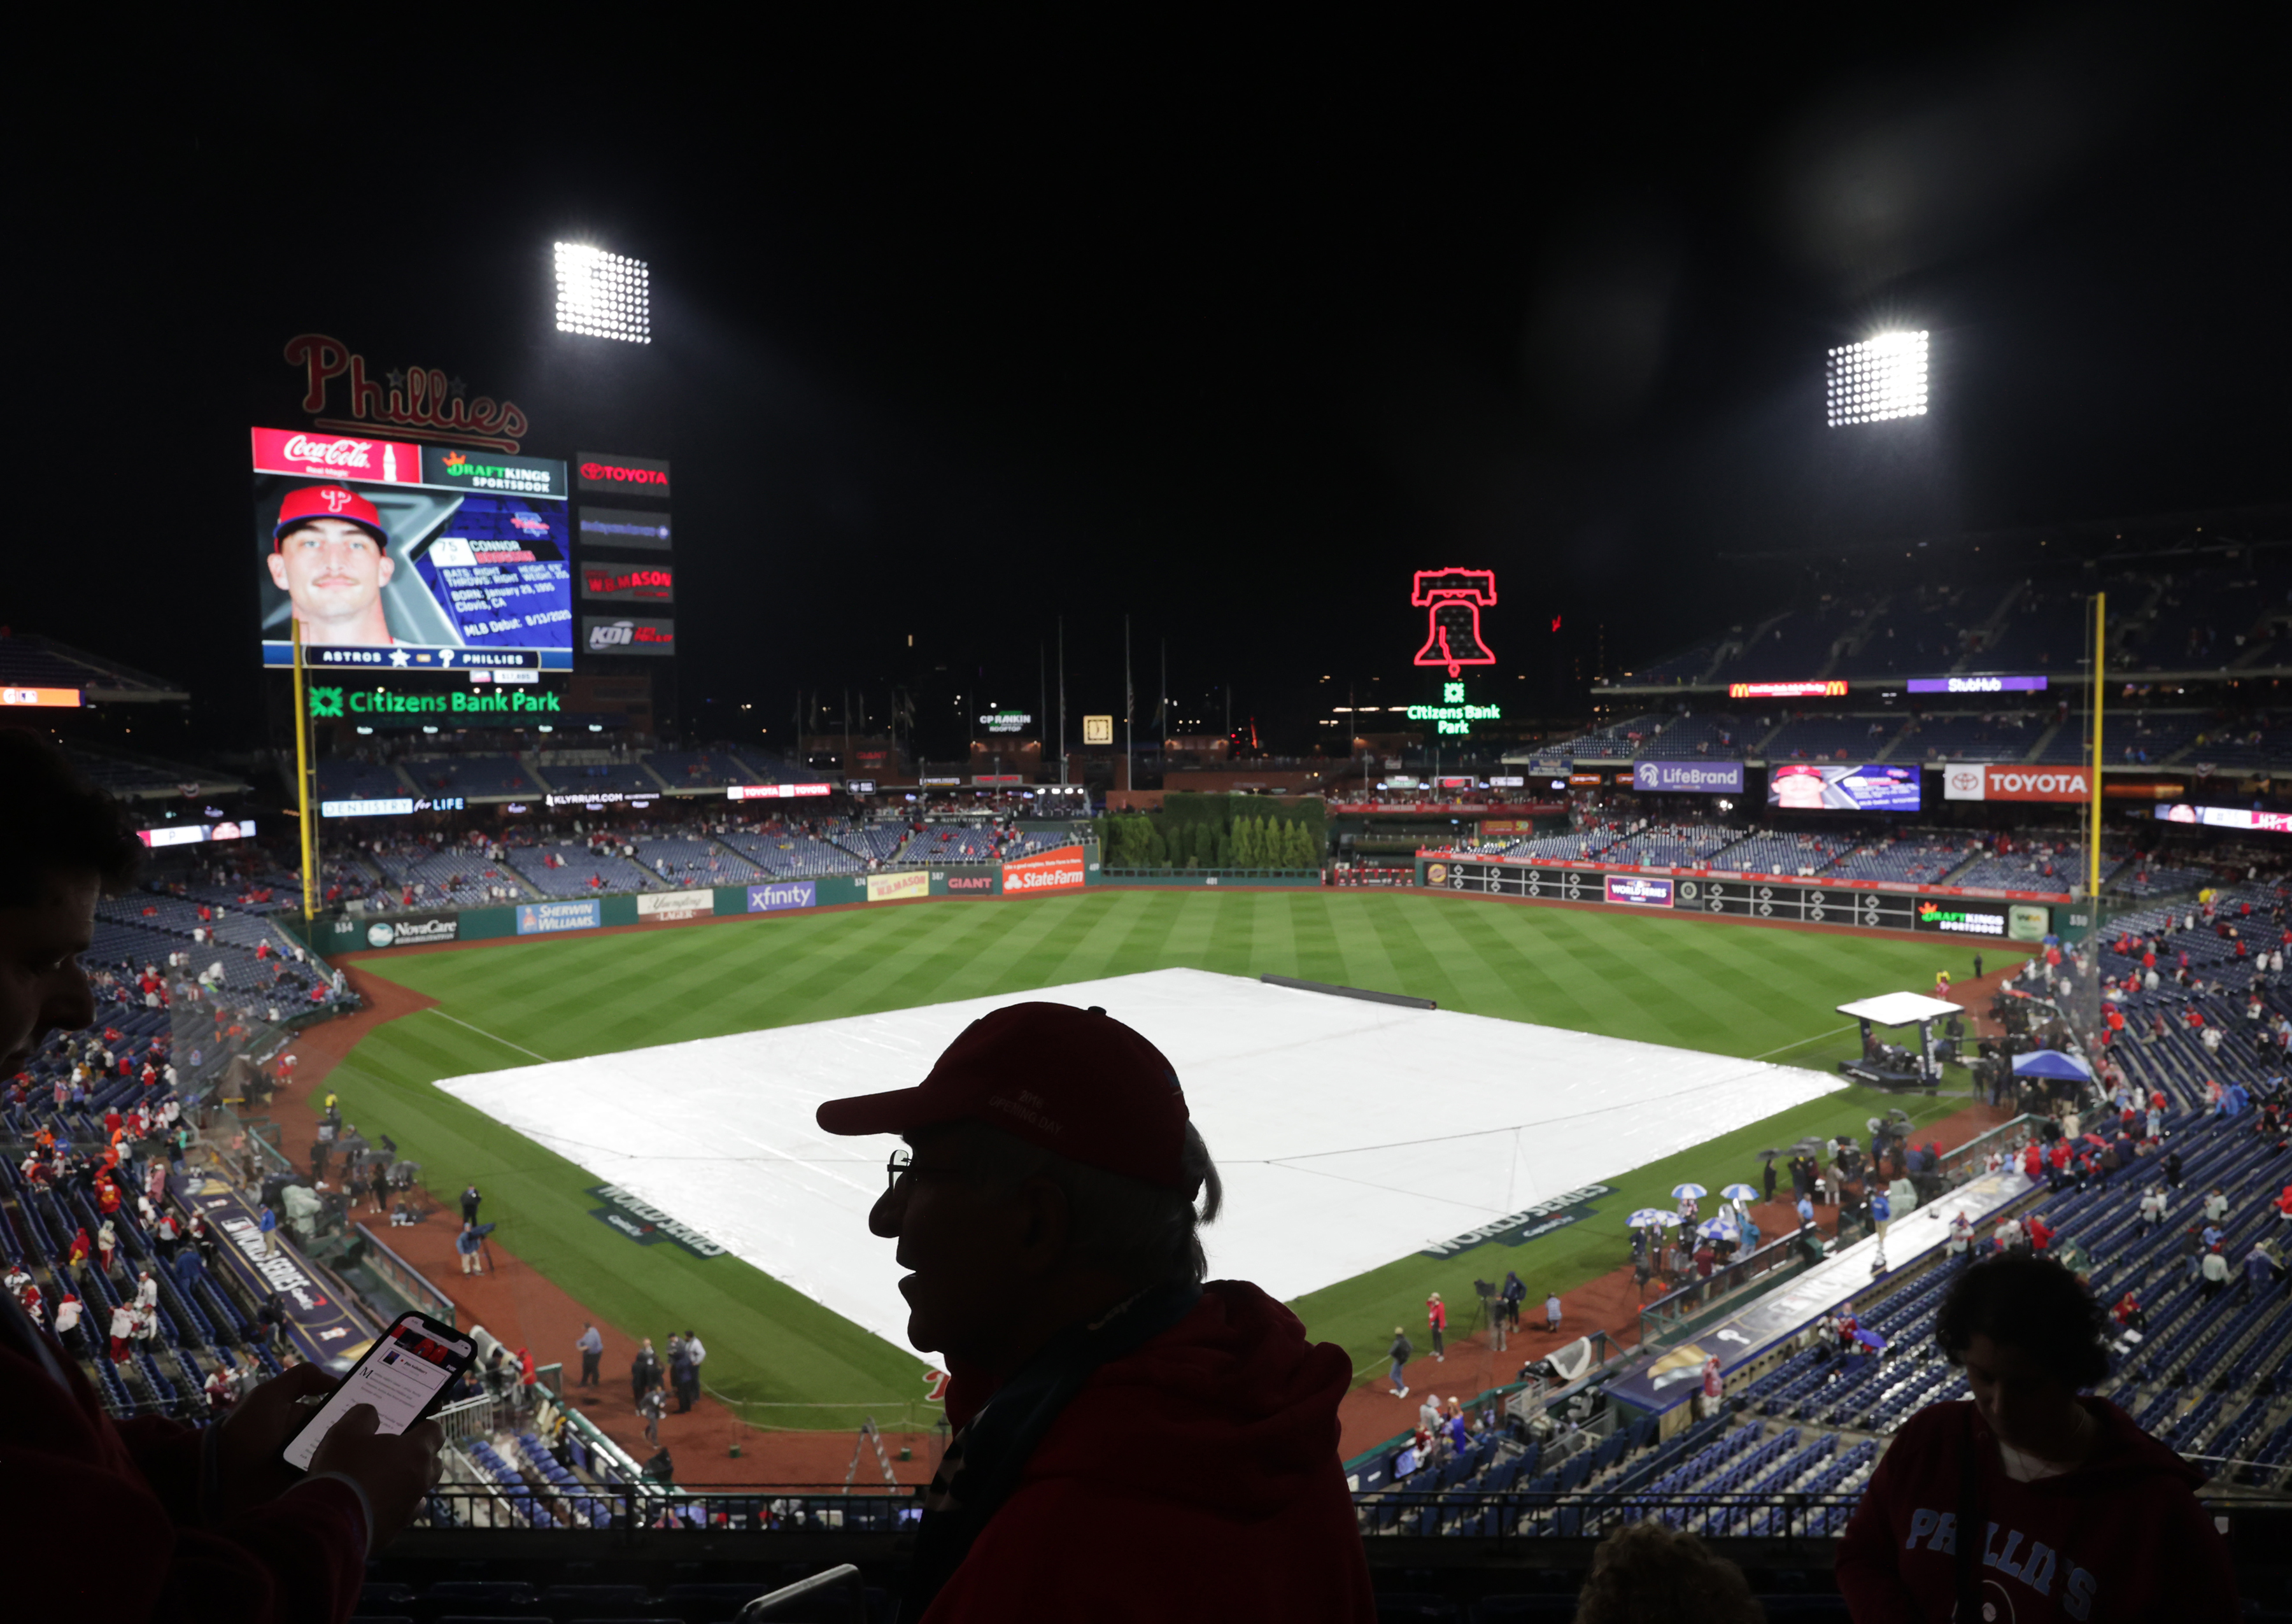 Fan information for World Series Game 3 at Citizens Bank Park